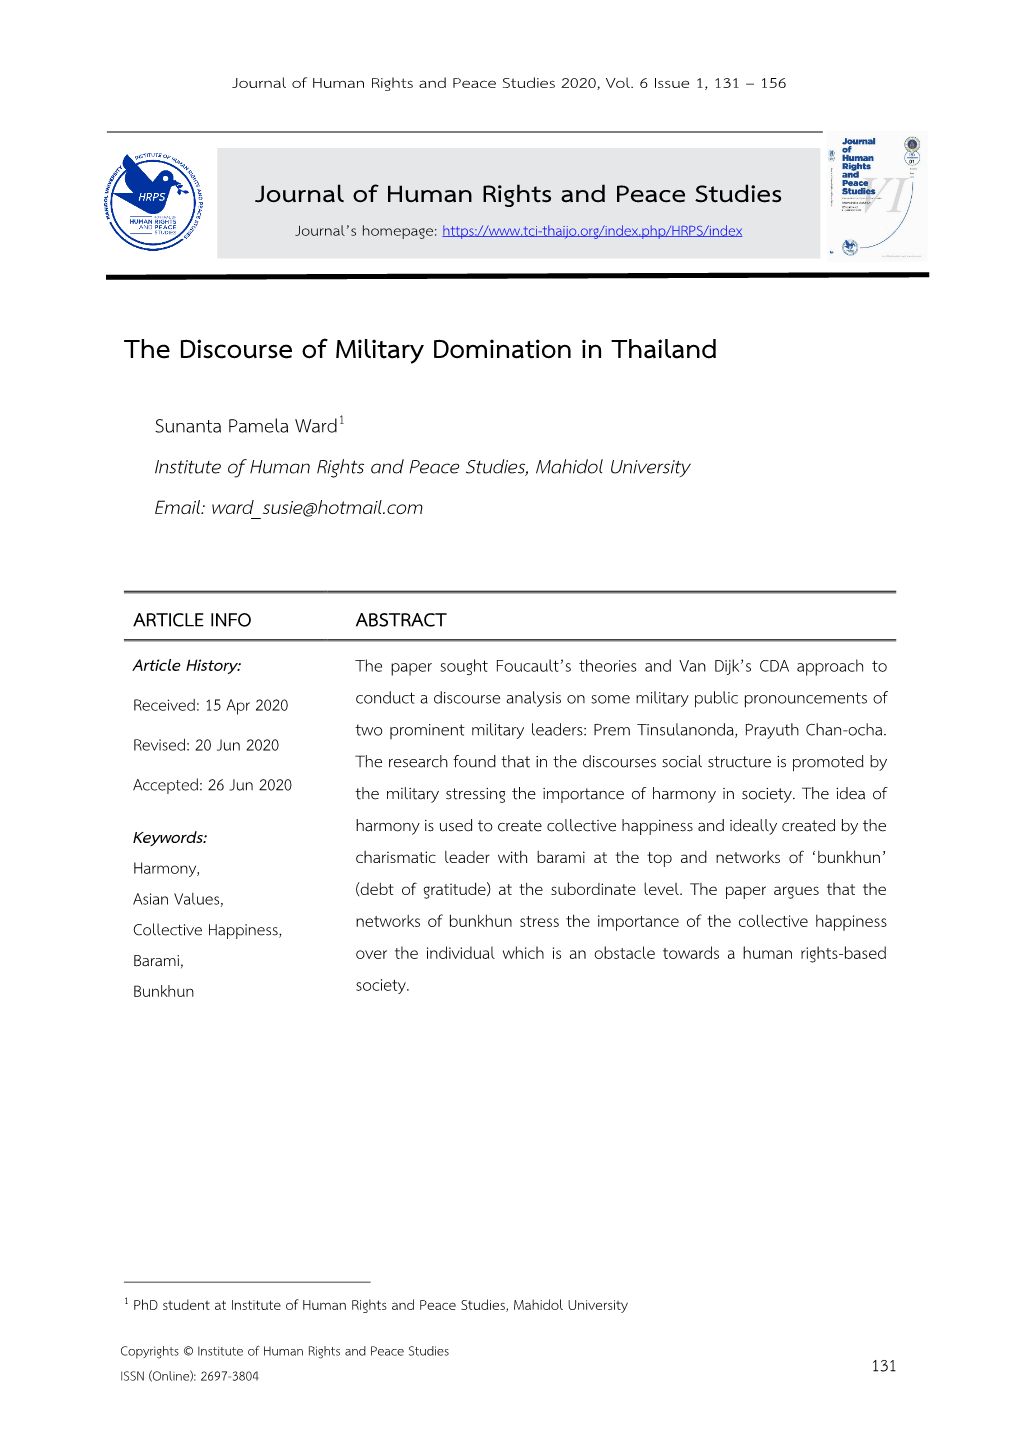 The Discourse of Military Domination in Thailand